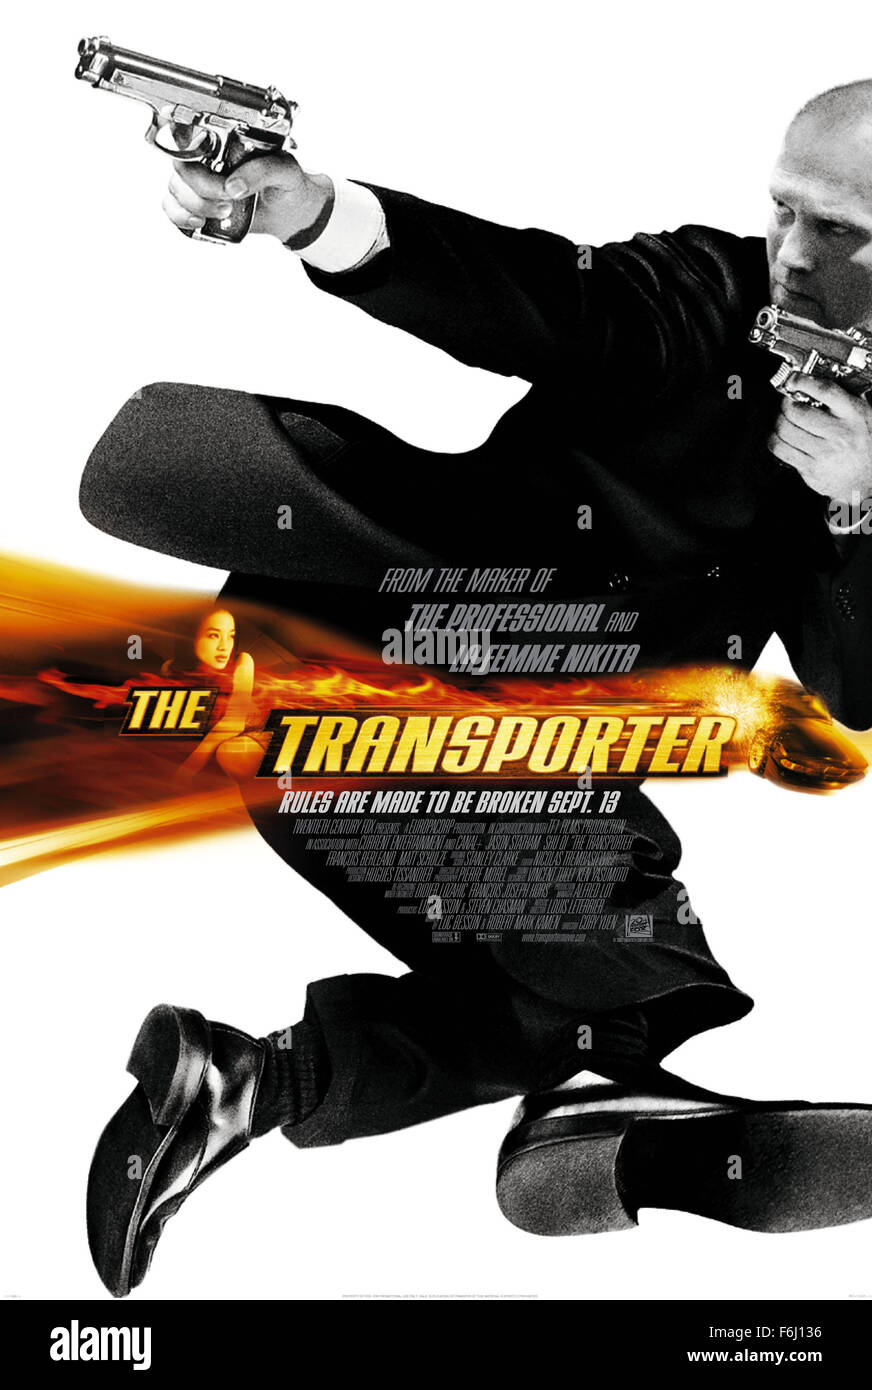 Oct 08, 2002; Los Angeles, CA, USA; Poster shot of 'The Transporter' starring JASON STATHAM as Frank Martin and QI SHU as Lai. Directed by Corey Yuen and will release October 11th 2002..  (Credit Image: Auto Images) Stock Photo